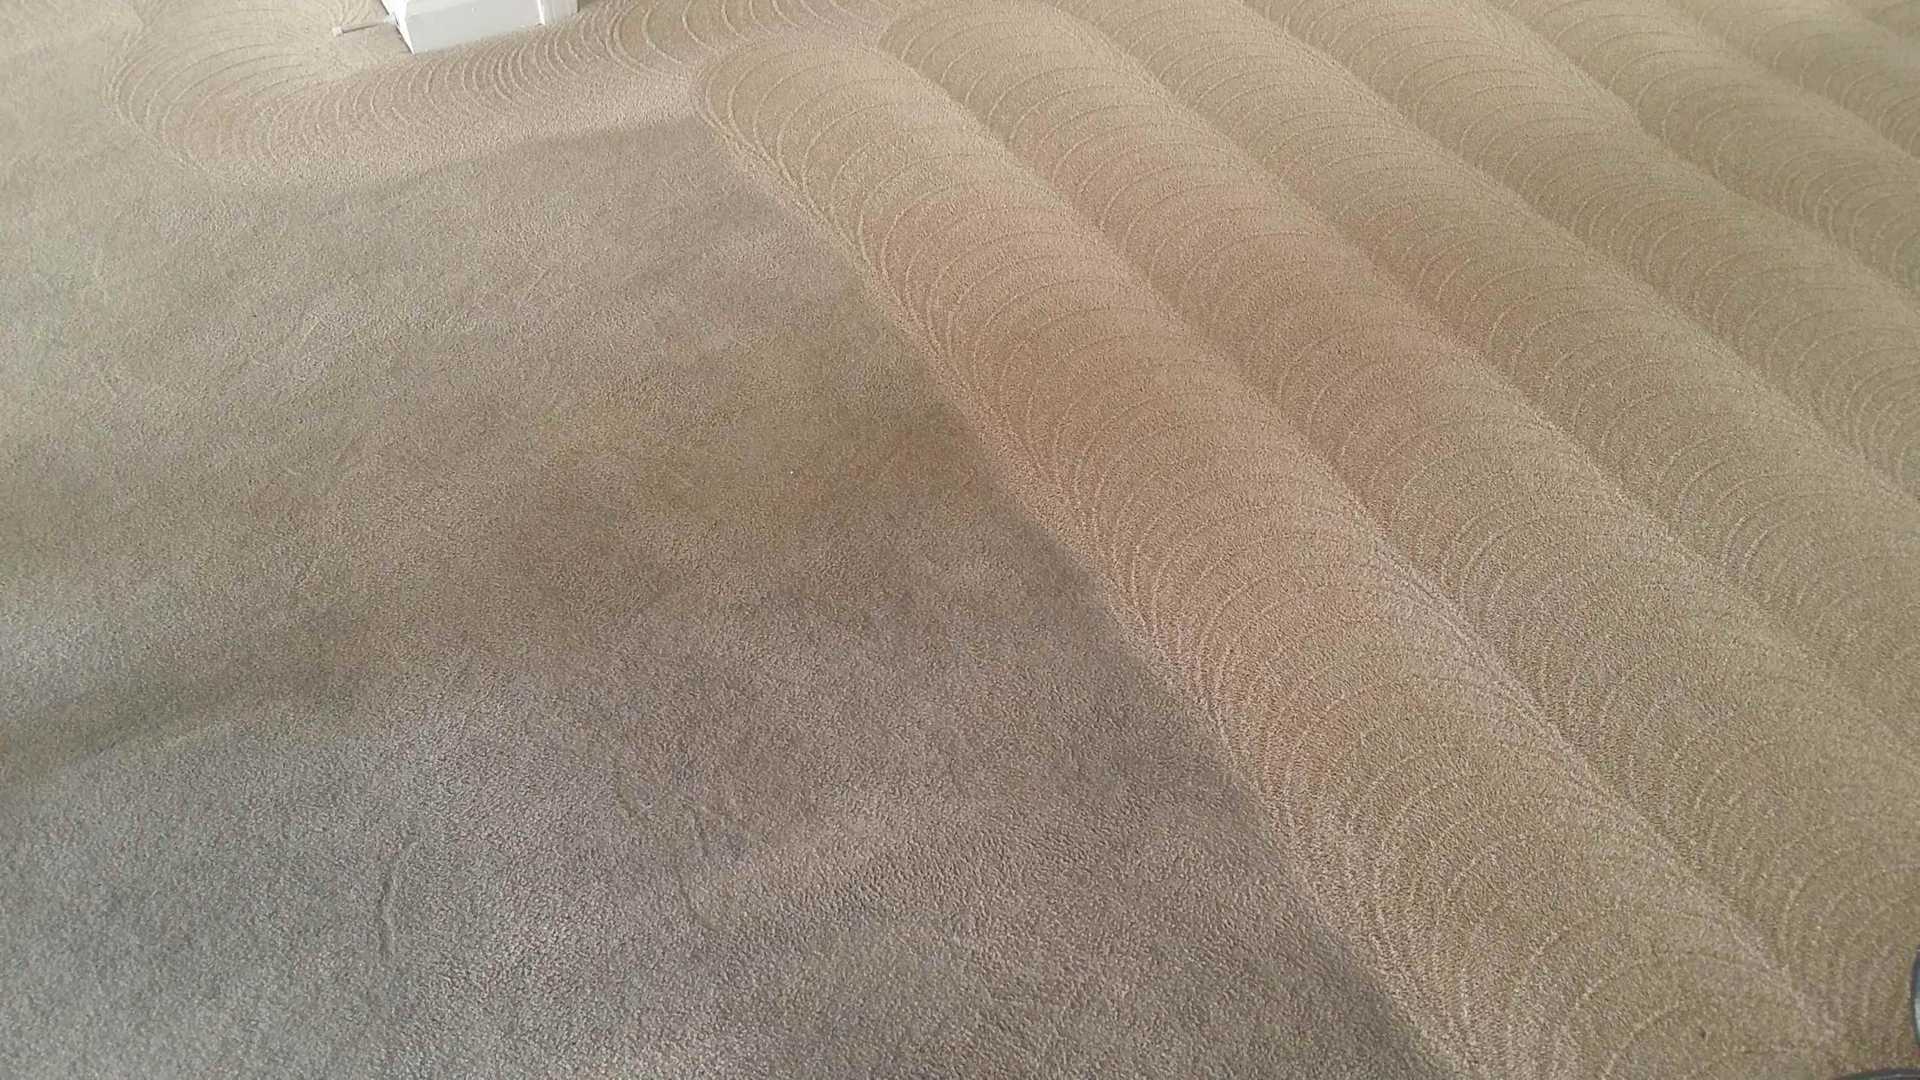 Carpet cleaning before and after with our deluxe package.